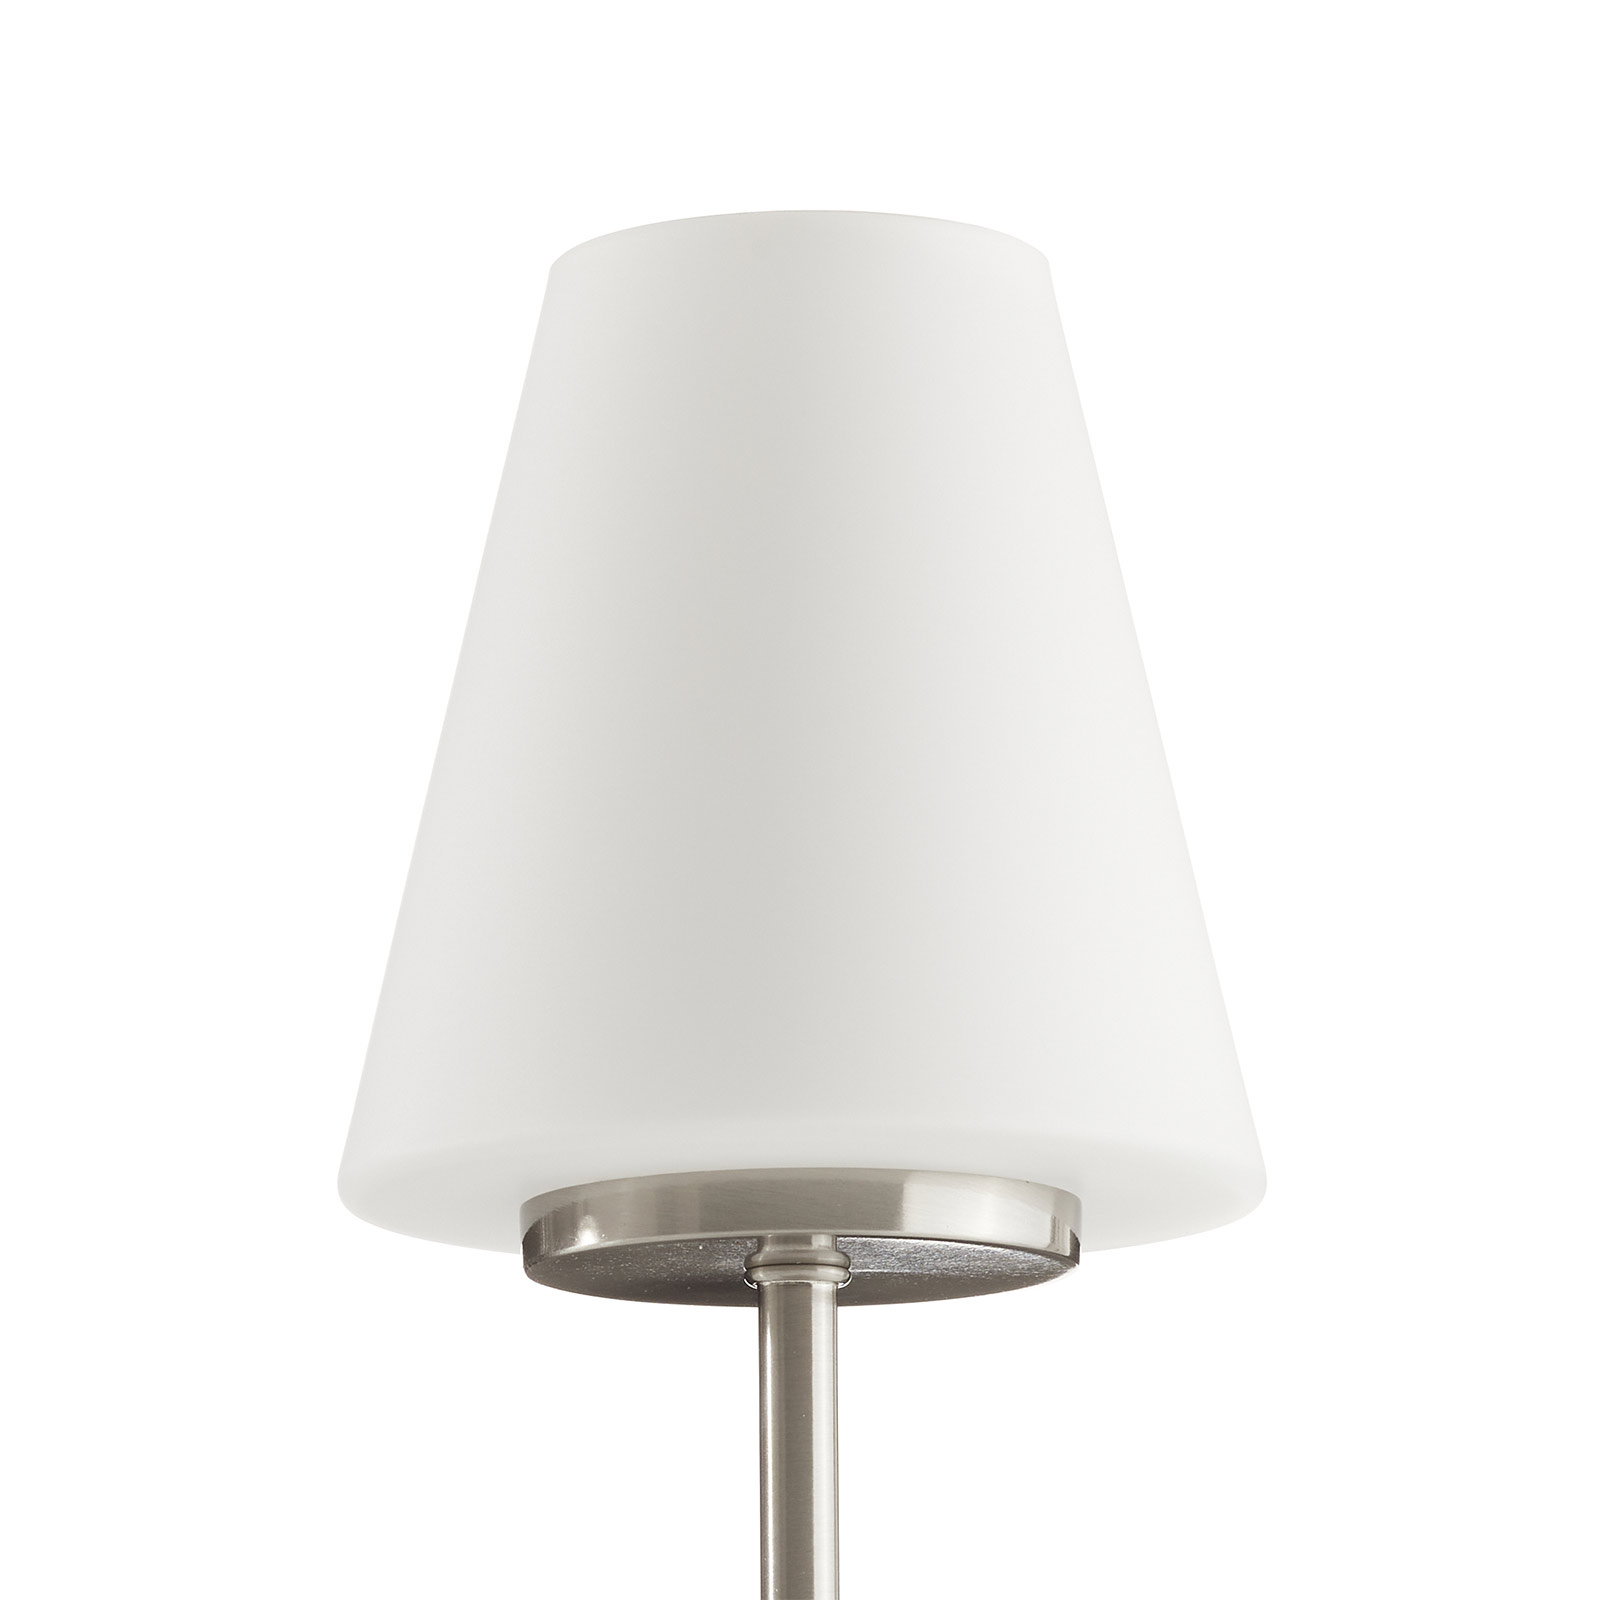 Lucy Big table lamp with a touch function, white